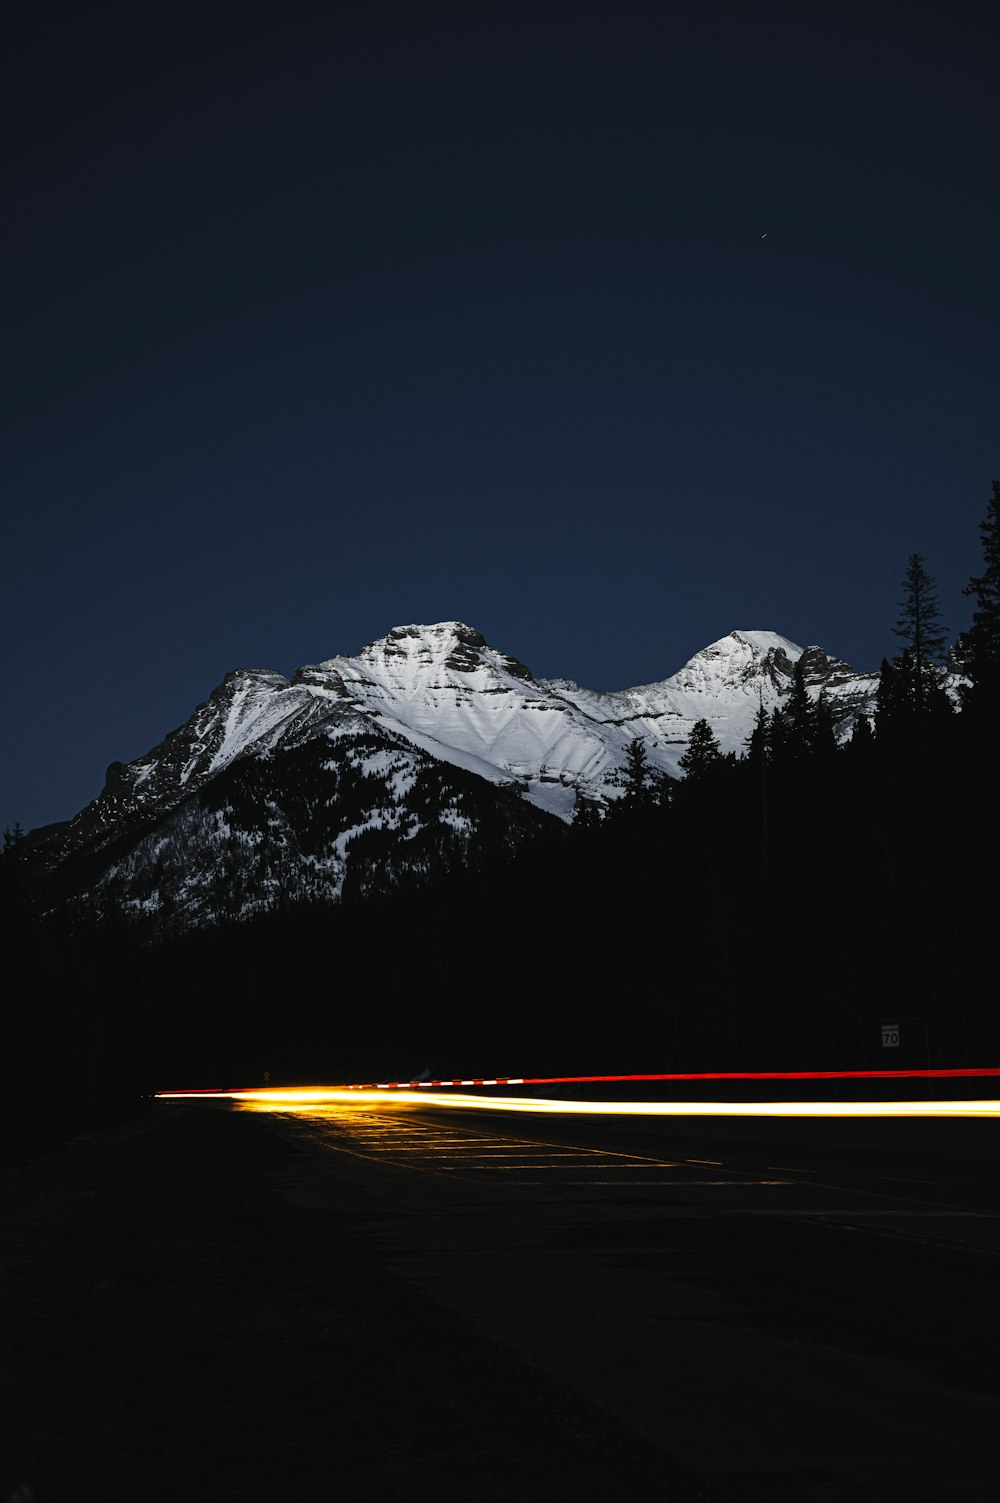 time lapse photography of road near snow covered mountain